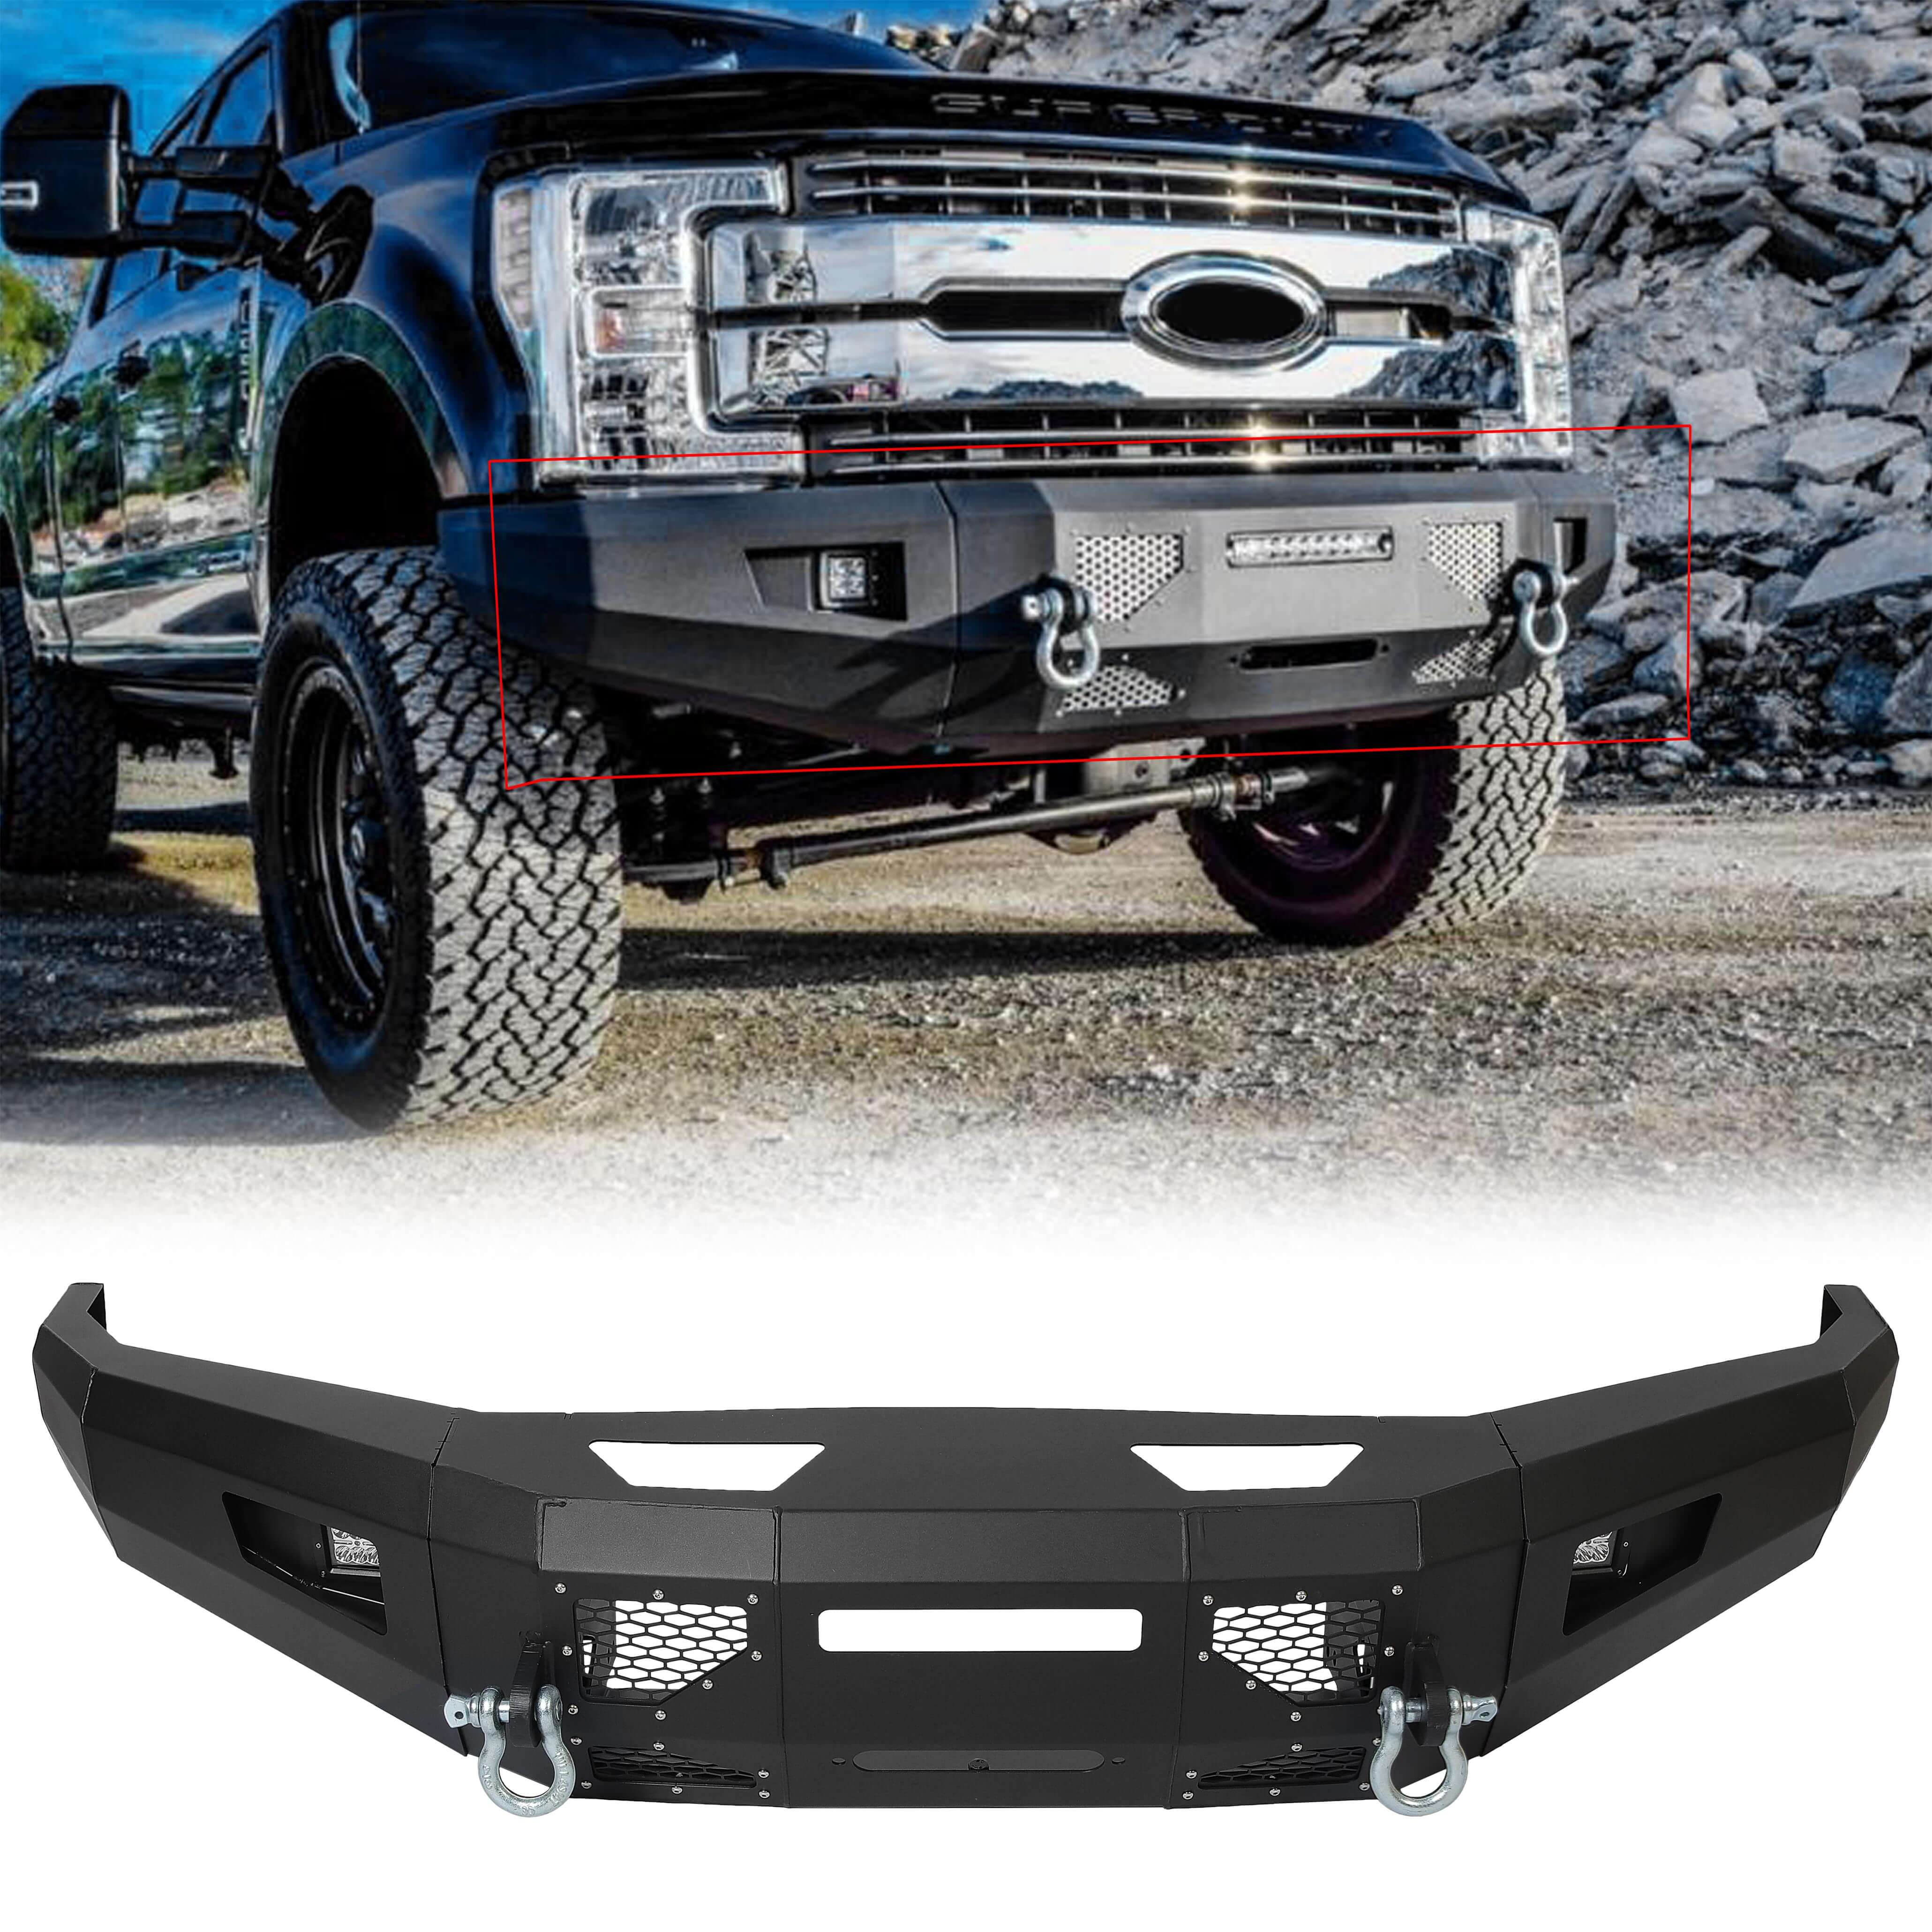 MR.GOP-Steel Front Bumper for 2017-2019 Ford F-250 F-350 F-450